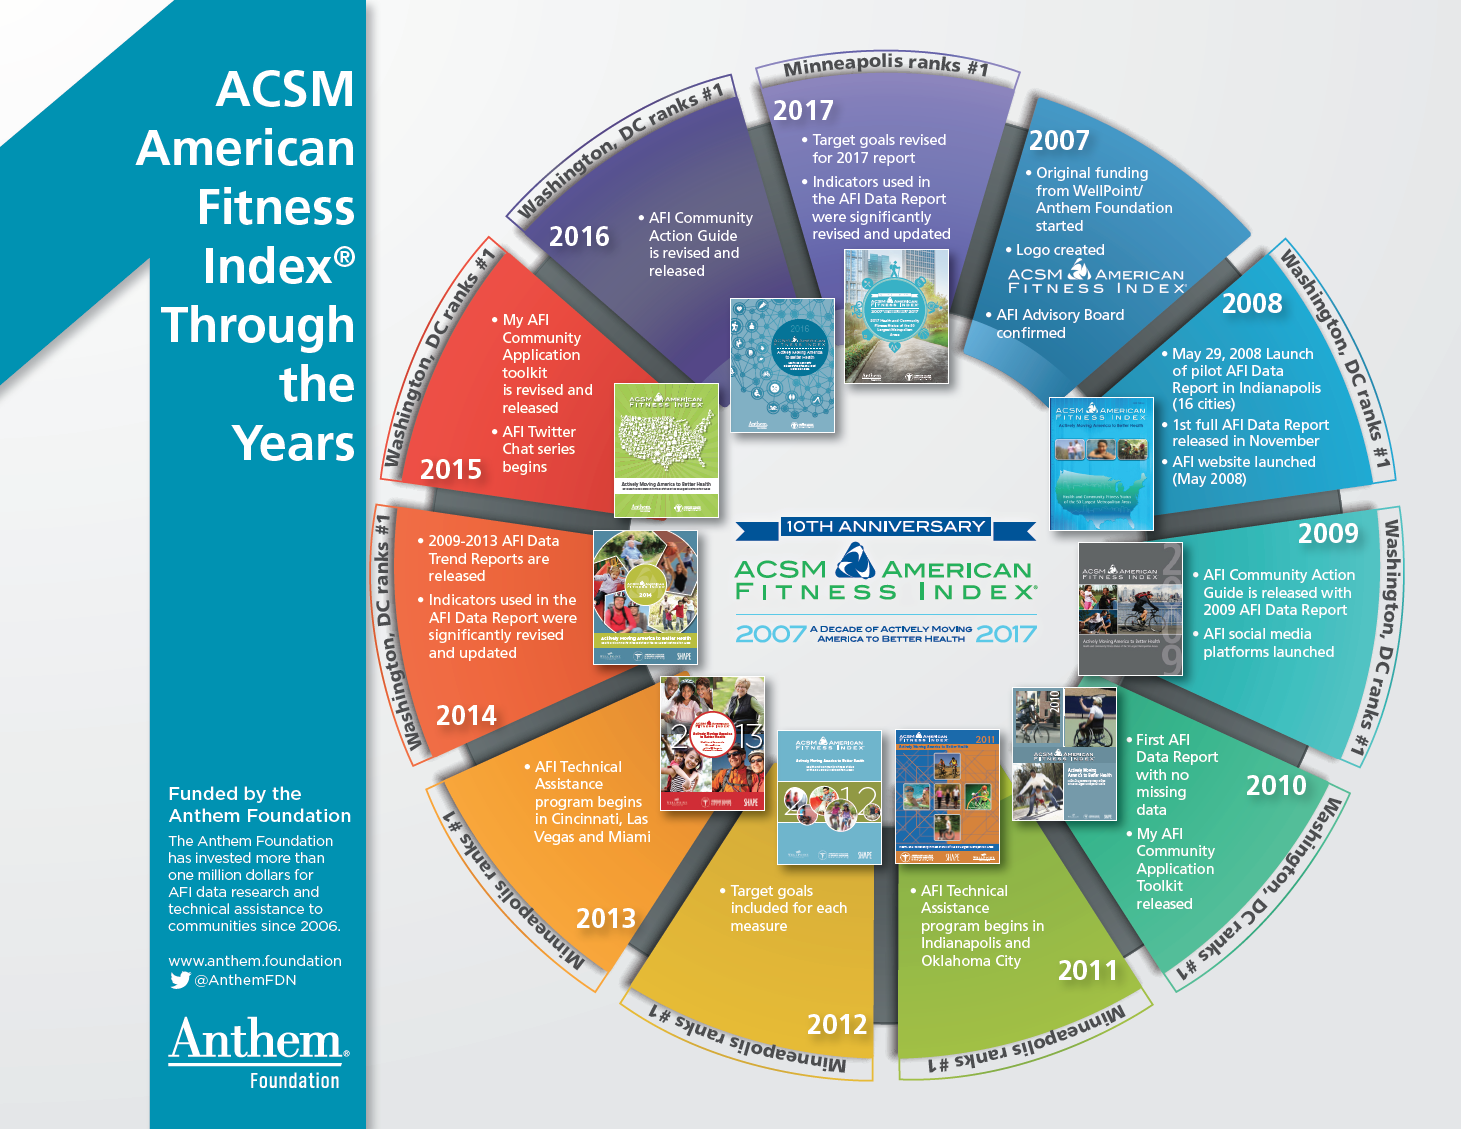 ACSM American Fitness Index Through the Years - American Fitness Index